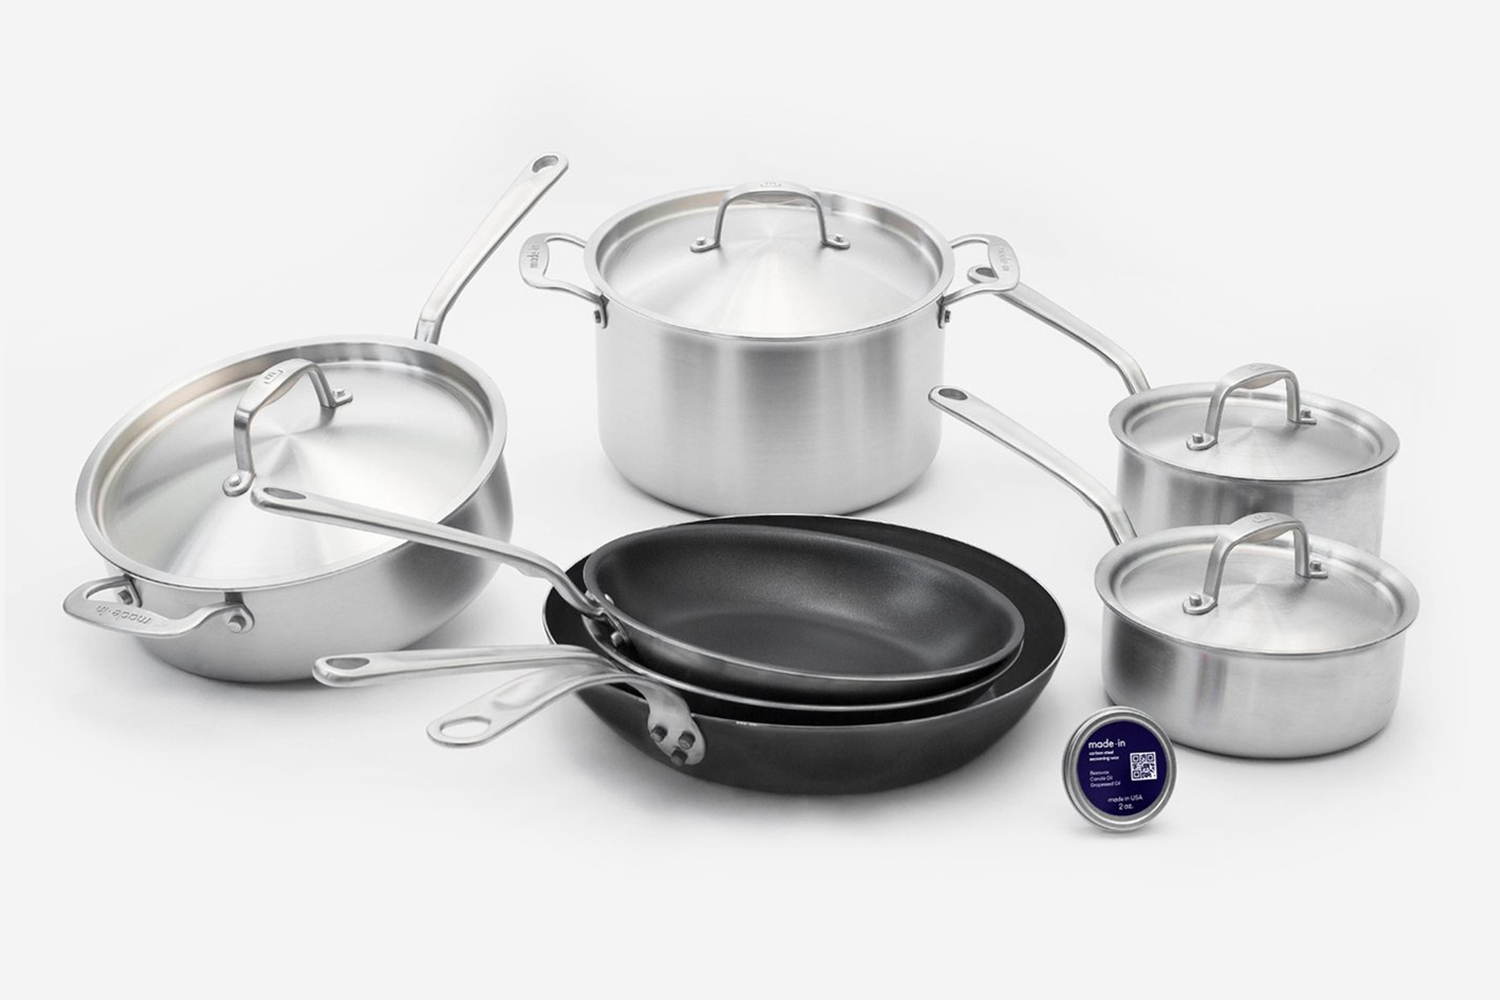 The Sous Chef Cookware Set from Made In, which includes stainless steel, blue carbon steel and nonstick pots and pans